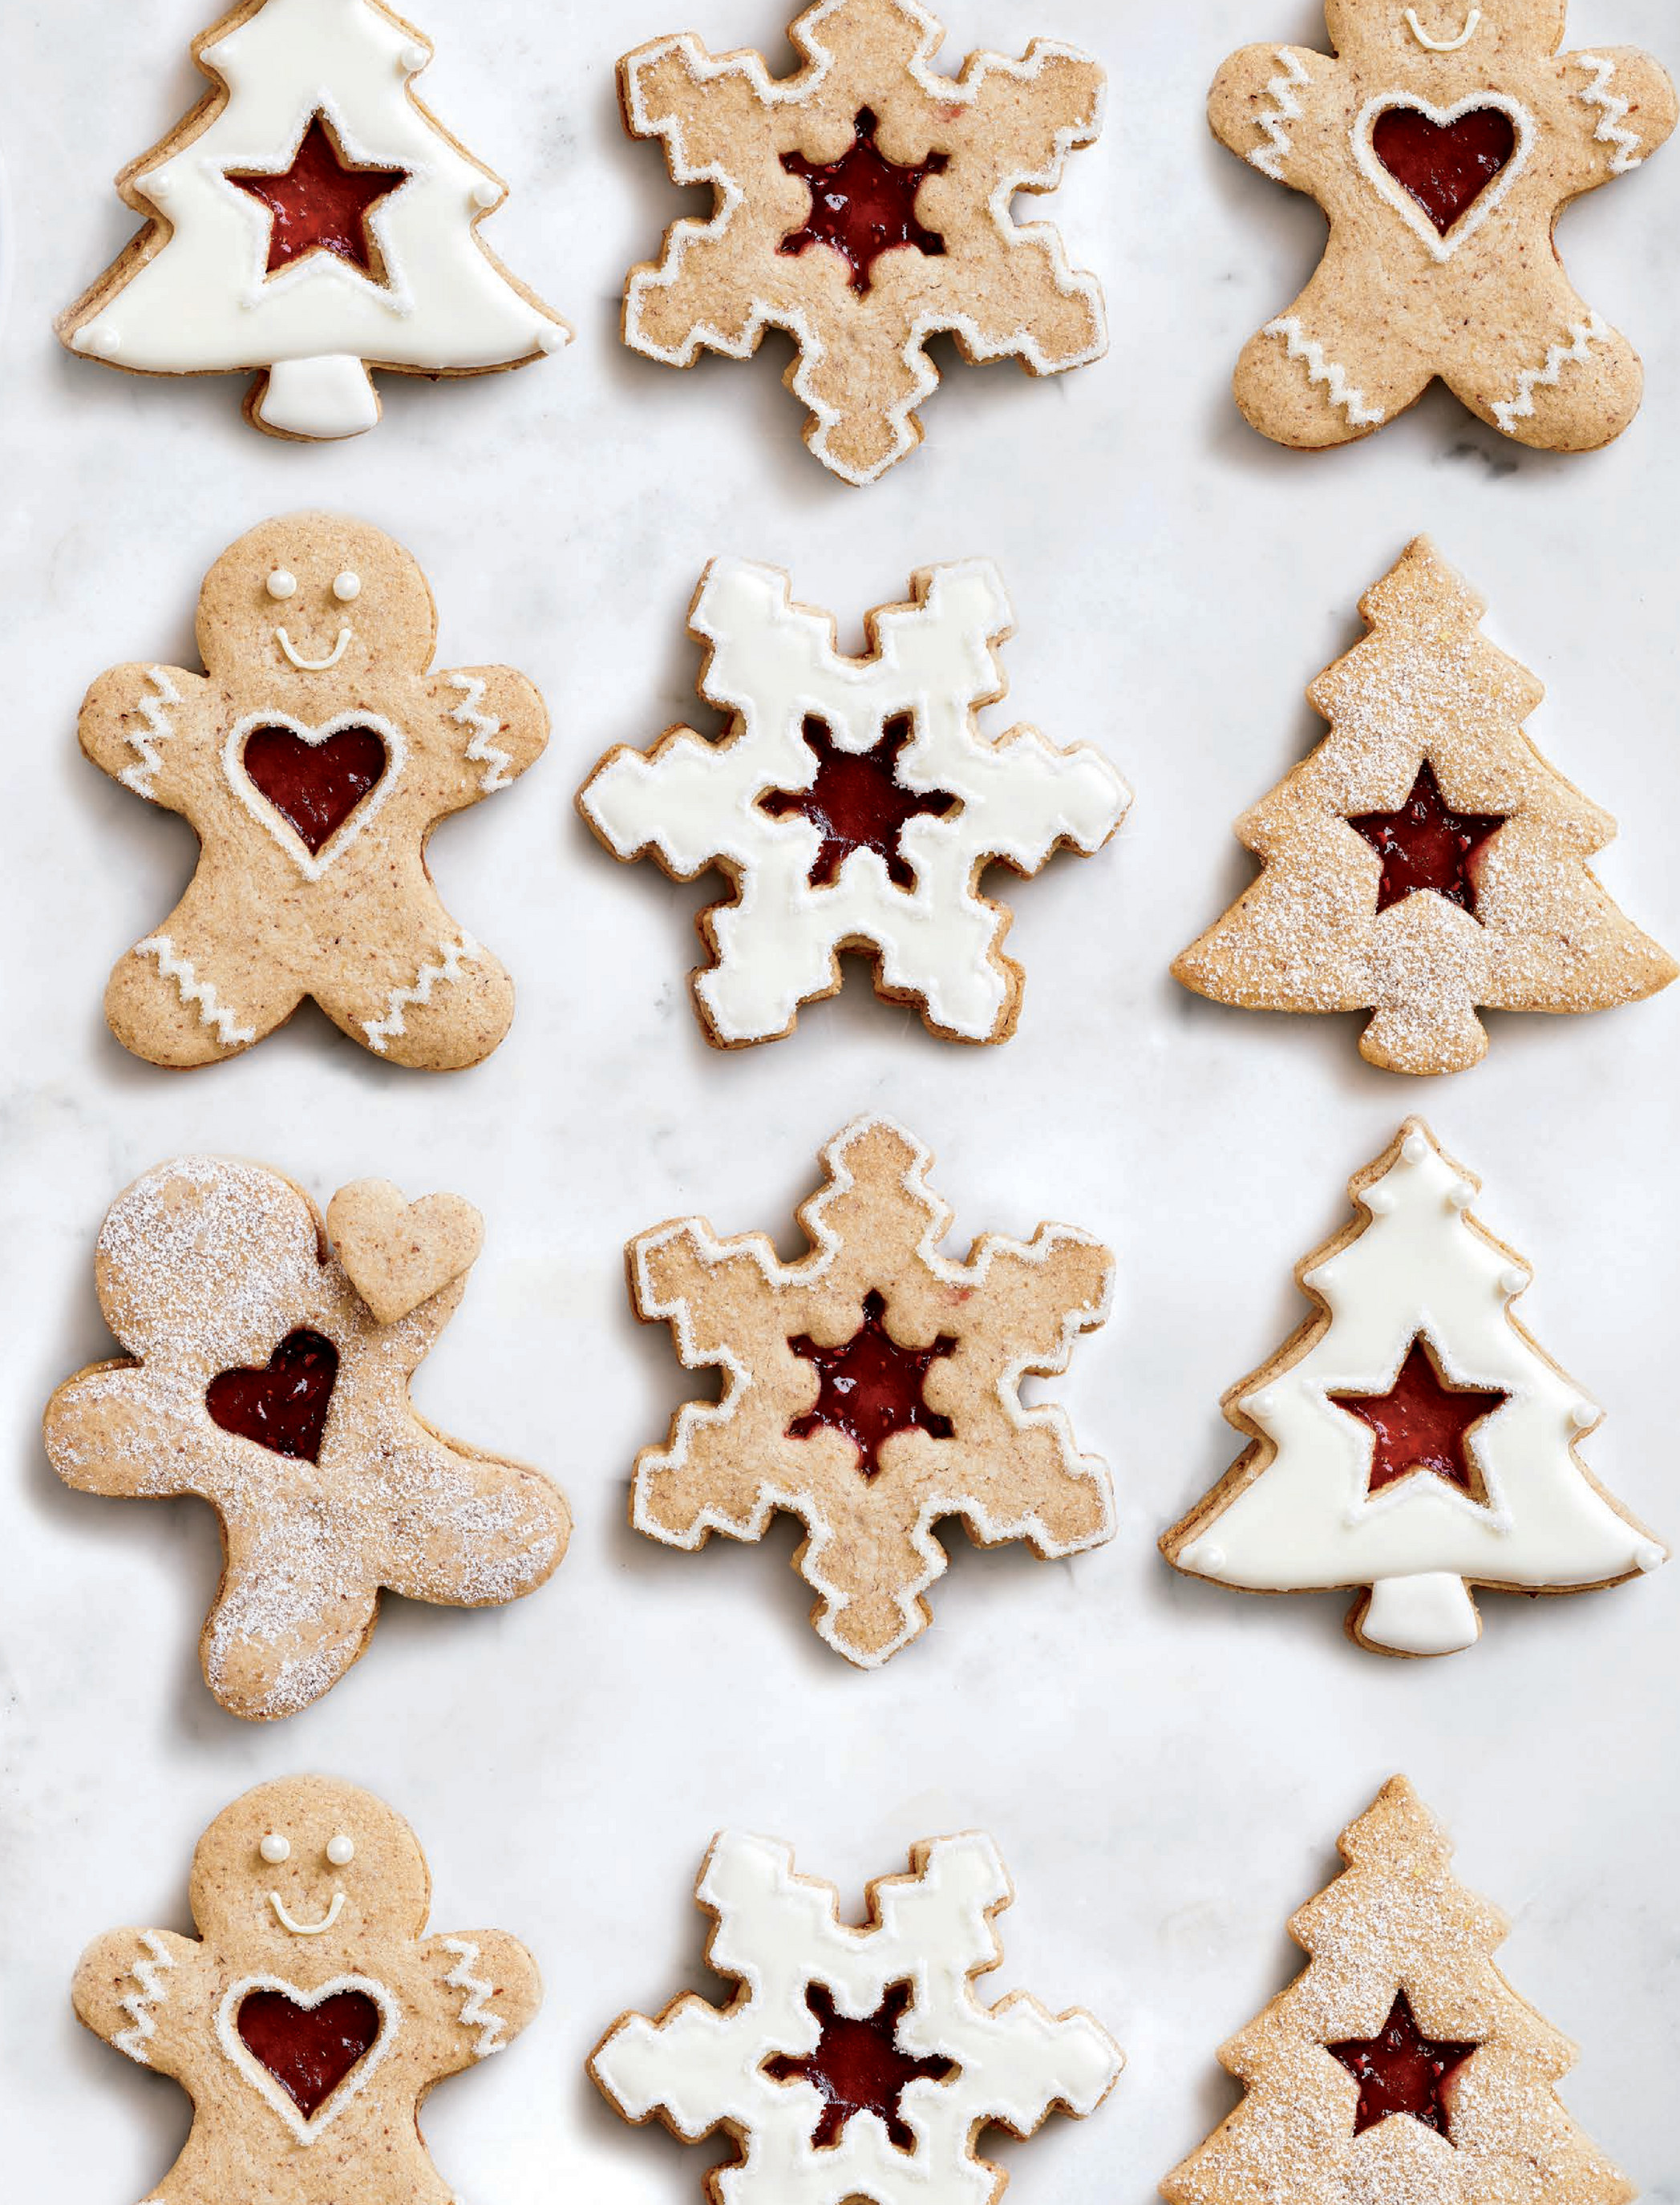 Trisha Yearwood Recipes Gingerbread Cookies - Pin On Christmas Cookies / Stories and recipes to ...